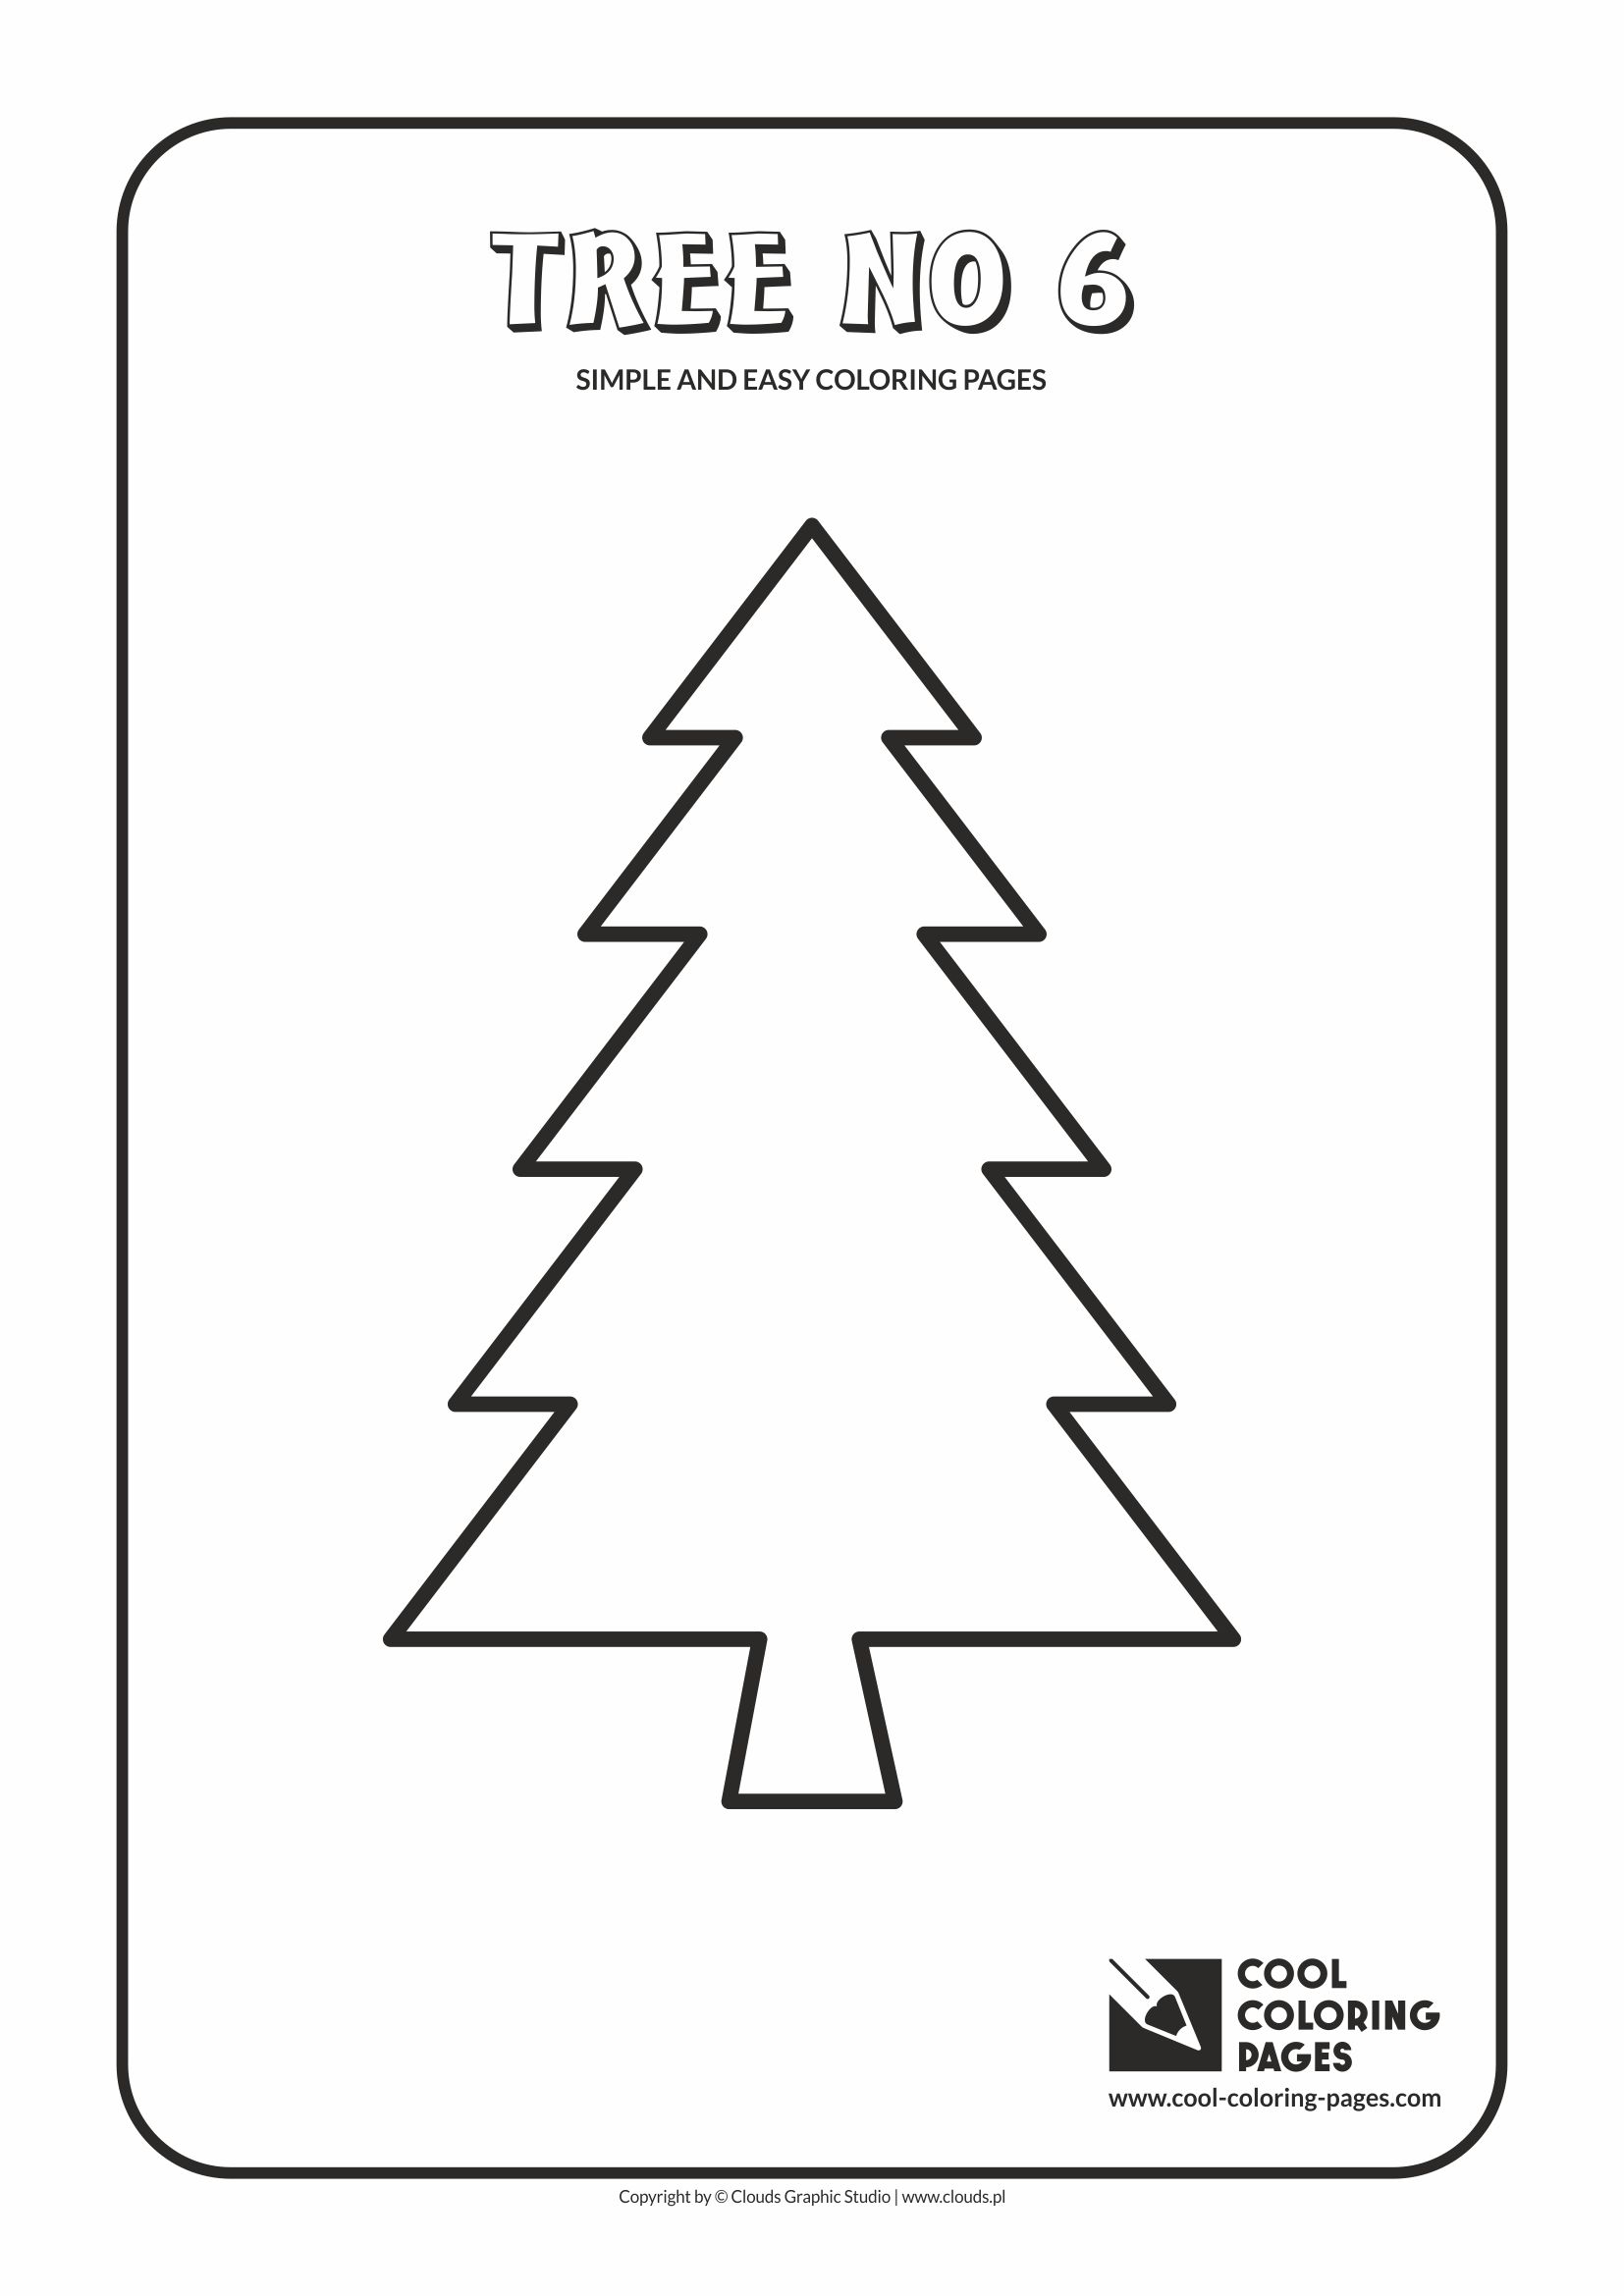 Simple and easy coloring pages for toddlers - Tree no 6